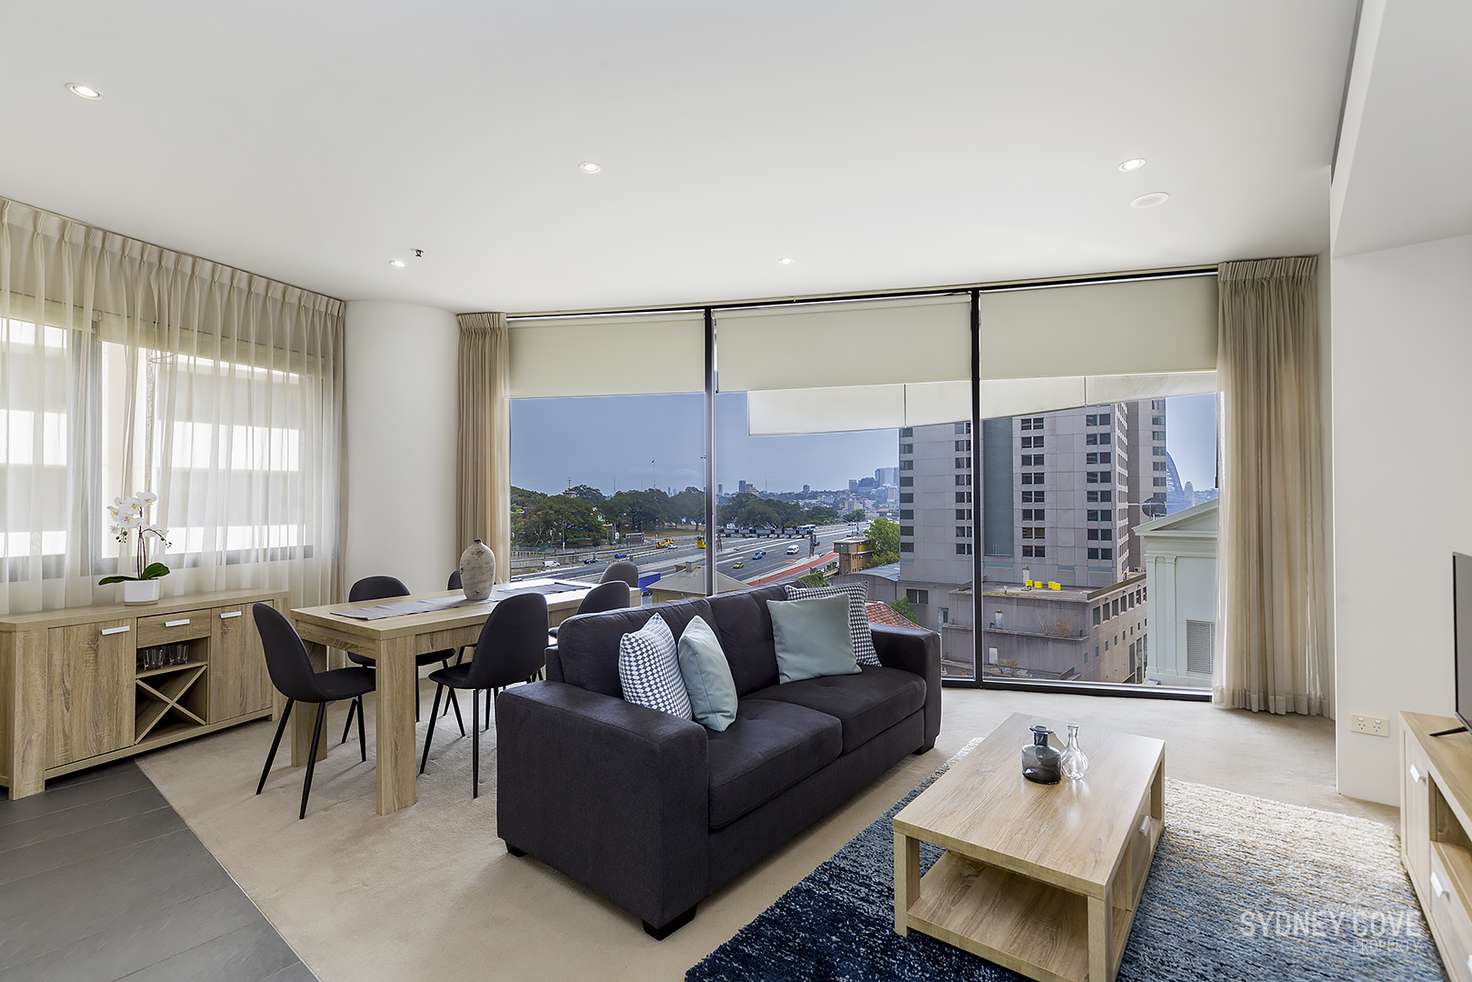 Main view of Homely apartment listing, 129 Harrington St, Sydney NSW 2000